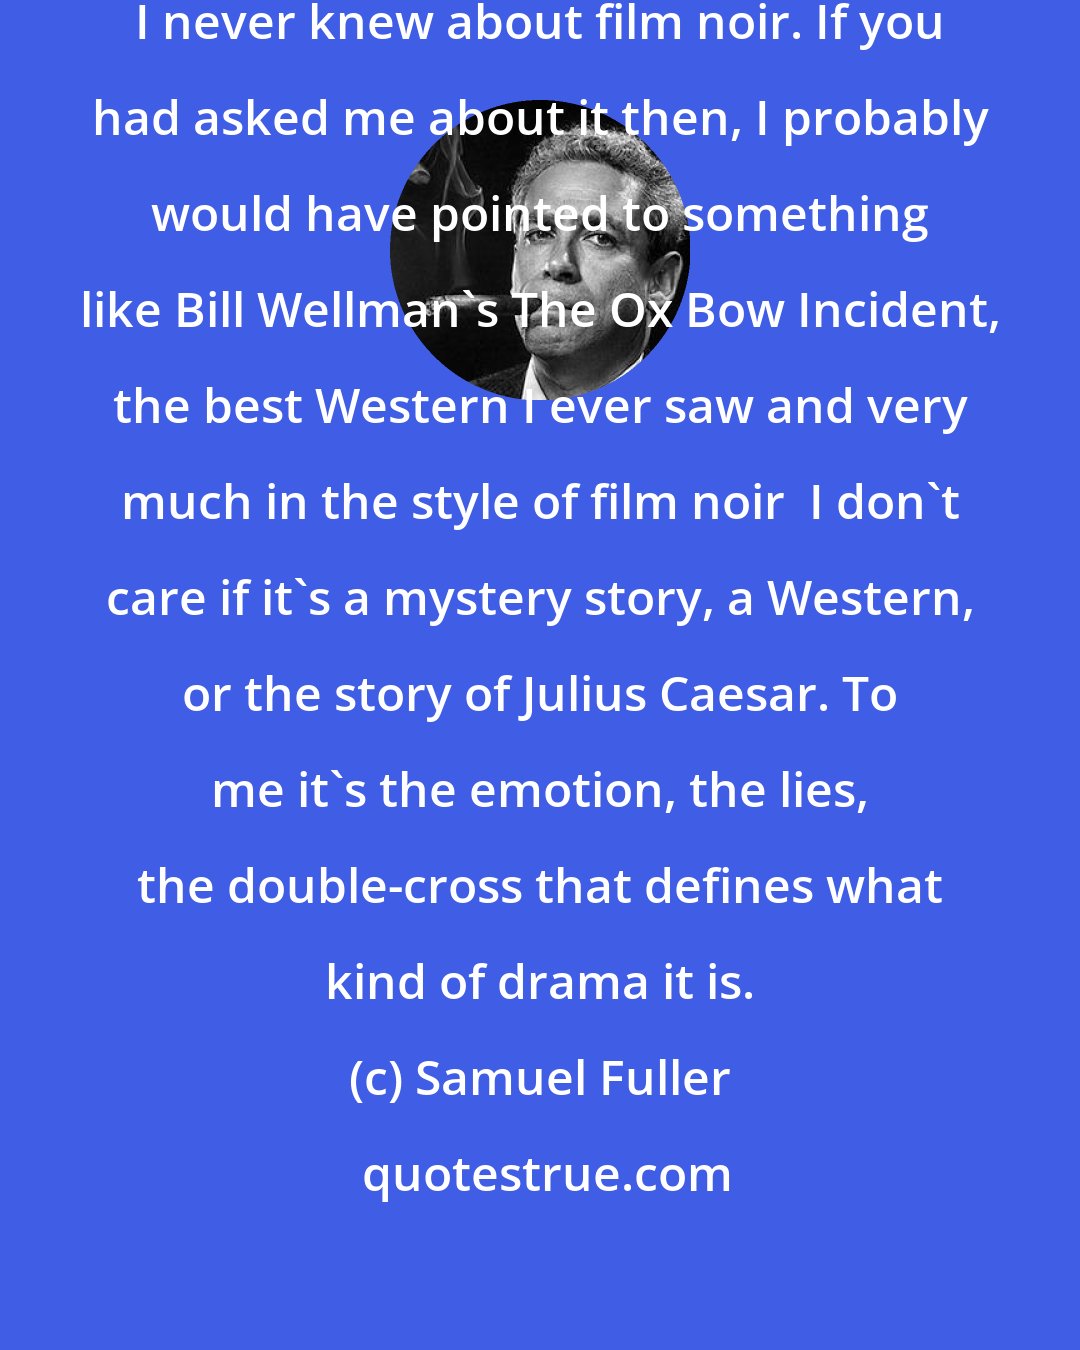 Samuel Fuller: When I was making these damned pictures, I never knew about film noir. If you had asked me about it then, I probably would have pointed to something like Bill Wellman's The Ox Bow Incident, the best Western I ever saw and very much in the style of film noir  I don't care if it's a mystery story, a Western, or the story of Julius Caesar. To me it's the emotion, the lies, the double-cross that defines what kind of drama it is.